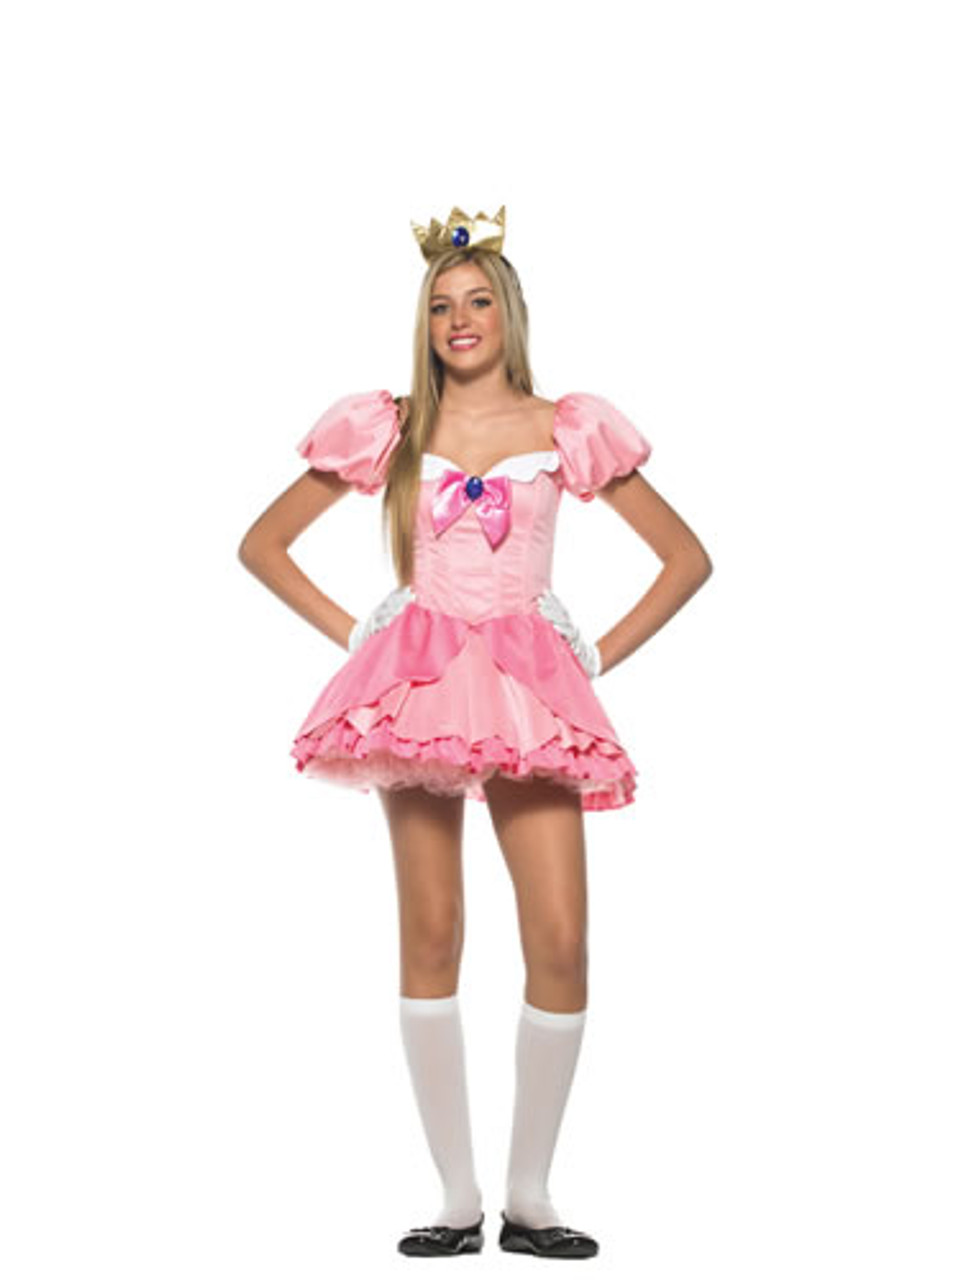 ALEKO 1- Size Fits All Unisex Ballet Princess Adult Halloween Costume  ICP06-HD - The Home Depot